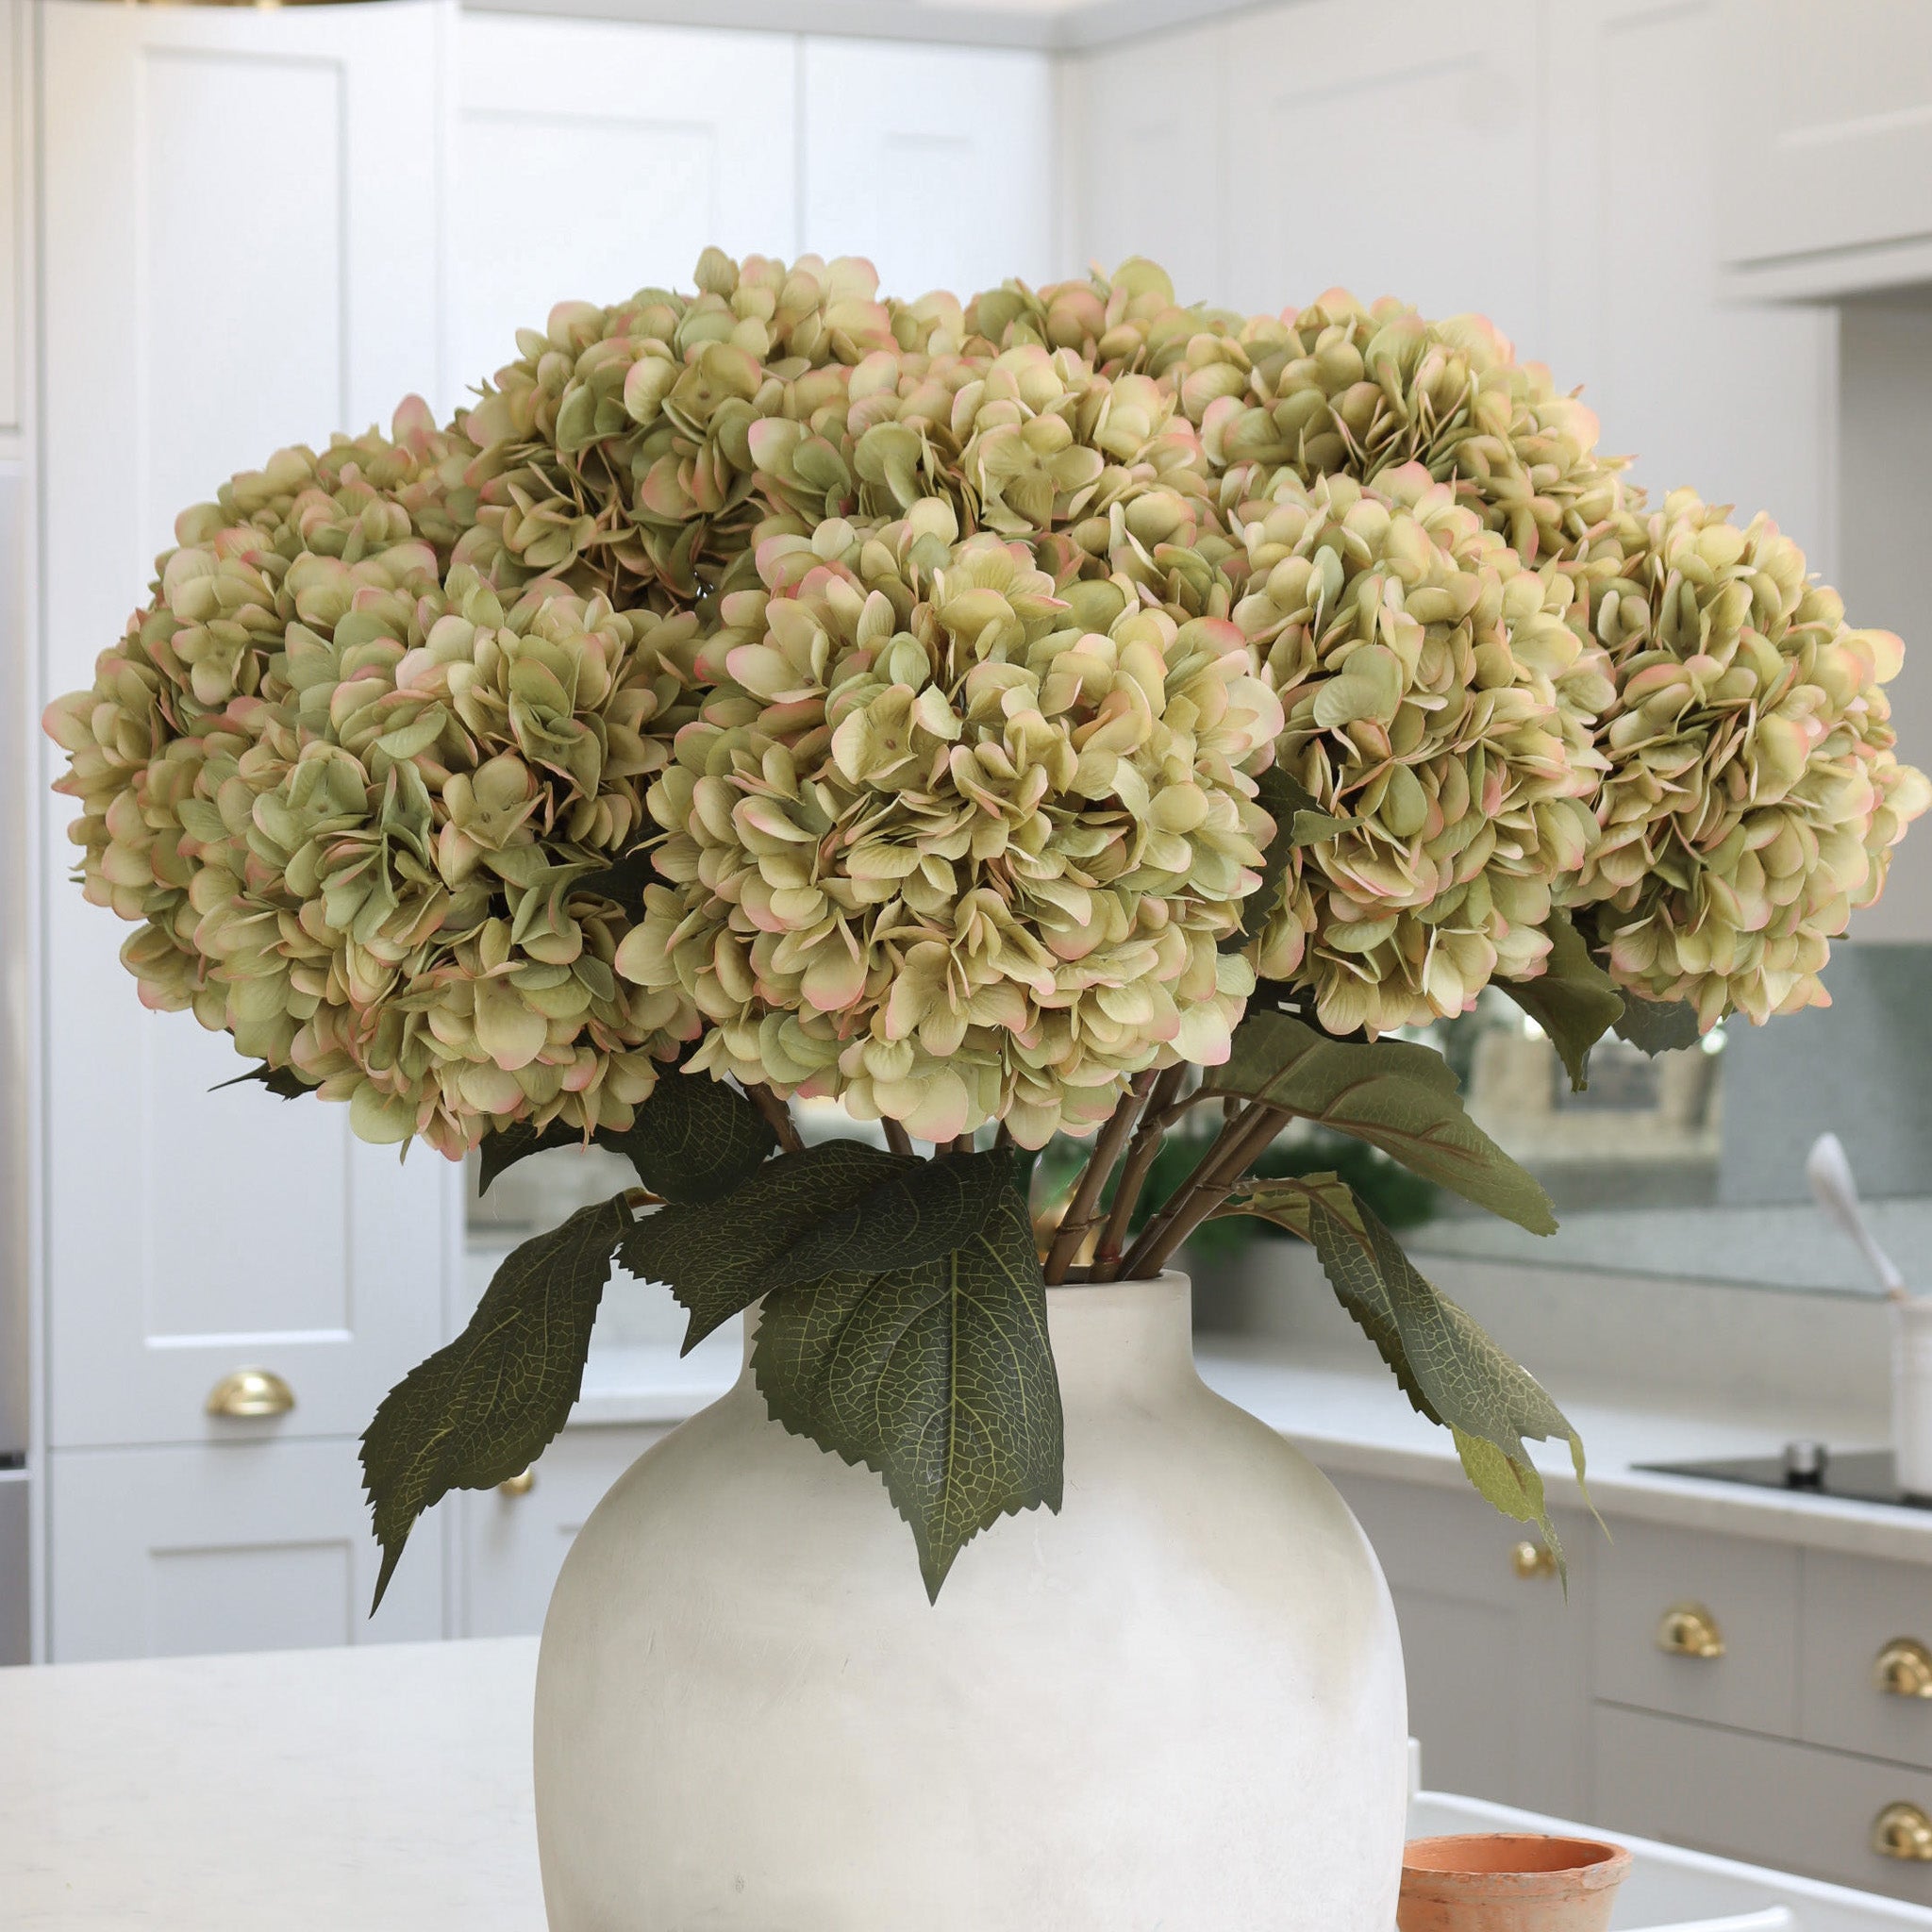 The Environmental Benefits of Faux Flowers